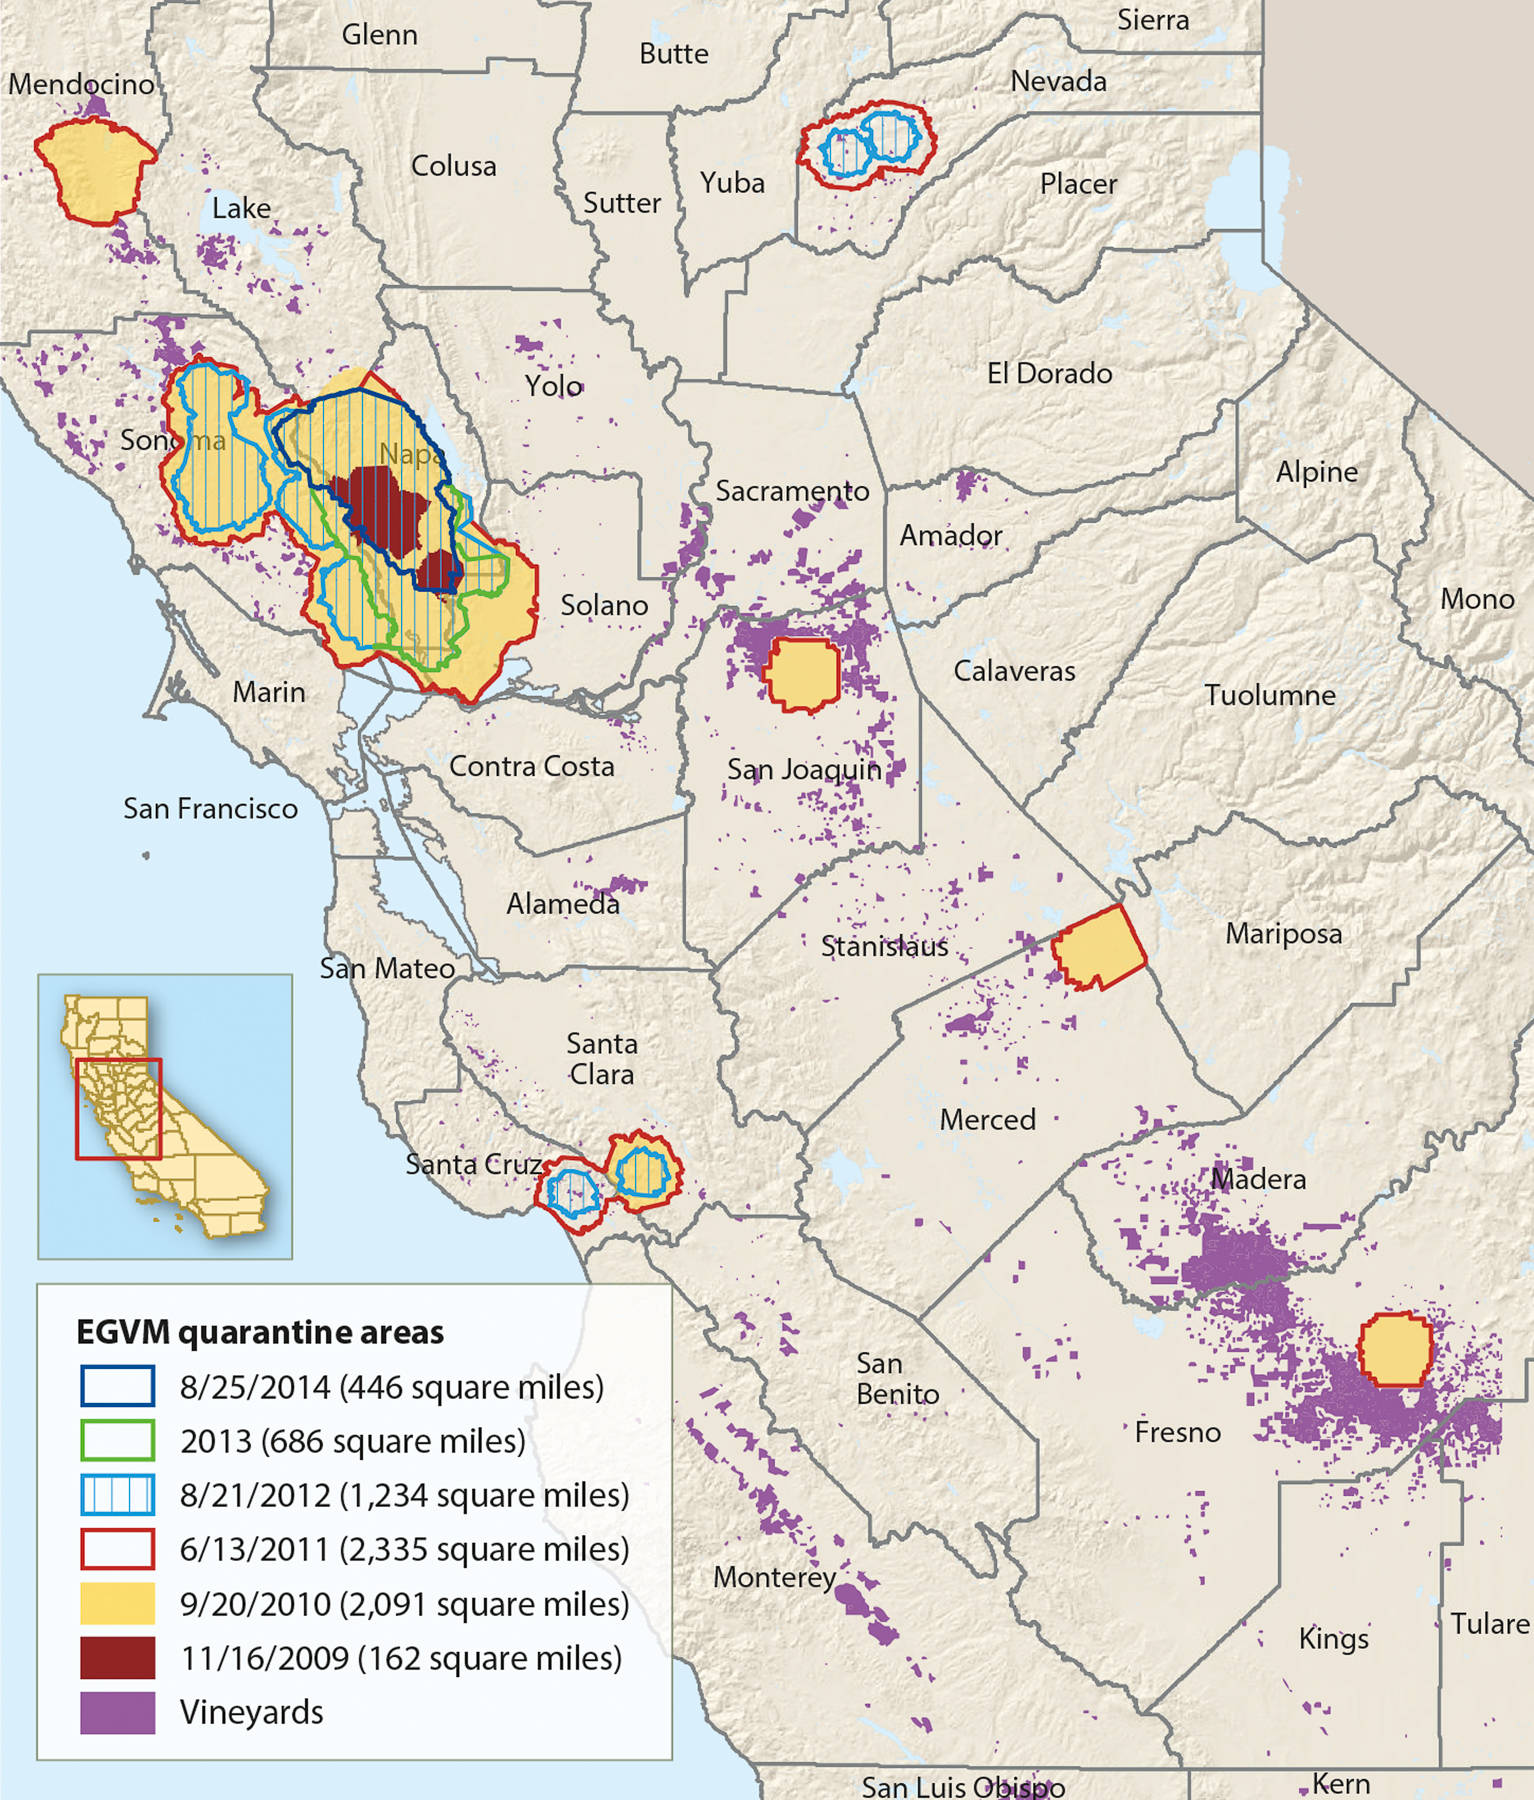 Regulated areas of California for EGVM, defined by USDA, 2009 to 2014.